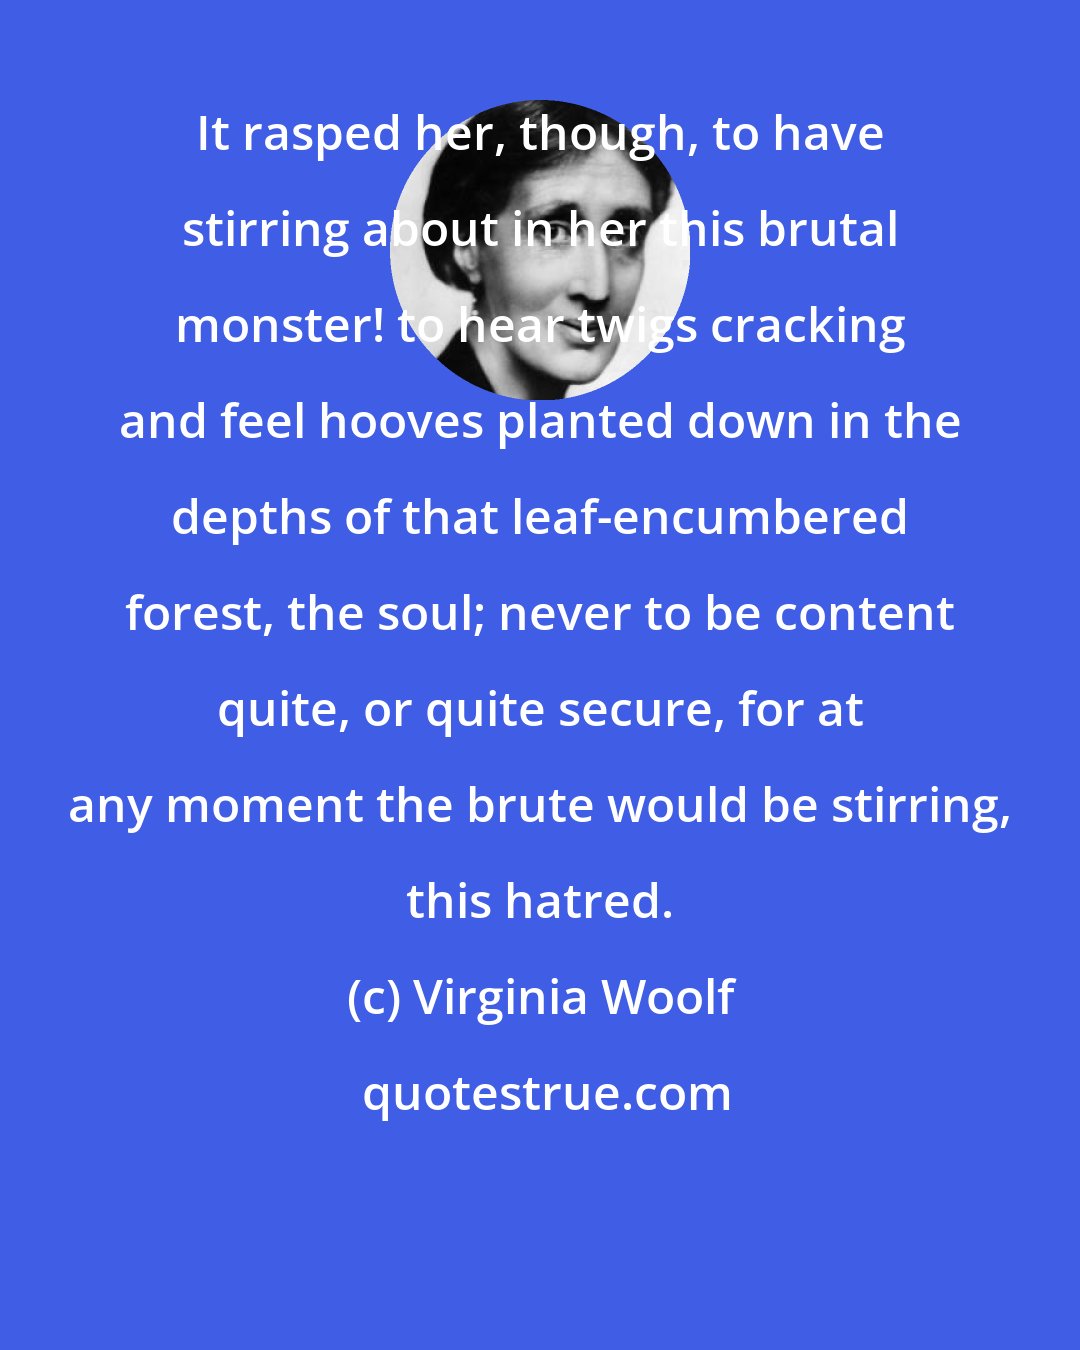 Virginia Woolf: It rasped her, though, to have stirring about in her this brutal monster! to hear twigs cracking and feel hooves planted down in the depths of that leaf-encumbered forest, the soul; never to be content quite, or quite secure, for at any moment the brute would be stirring, this hatred.